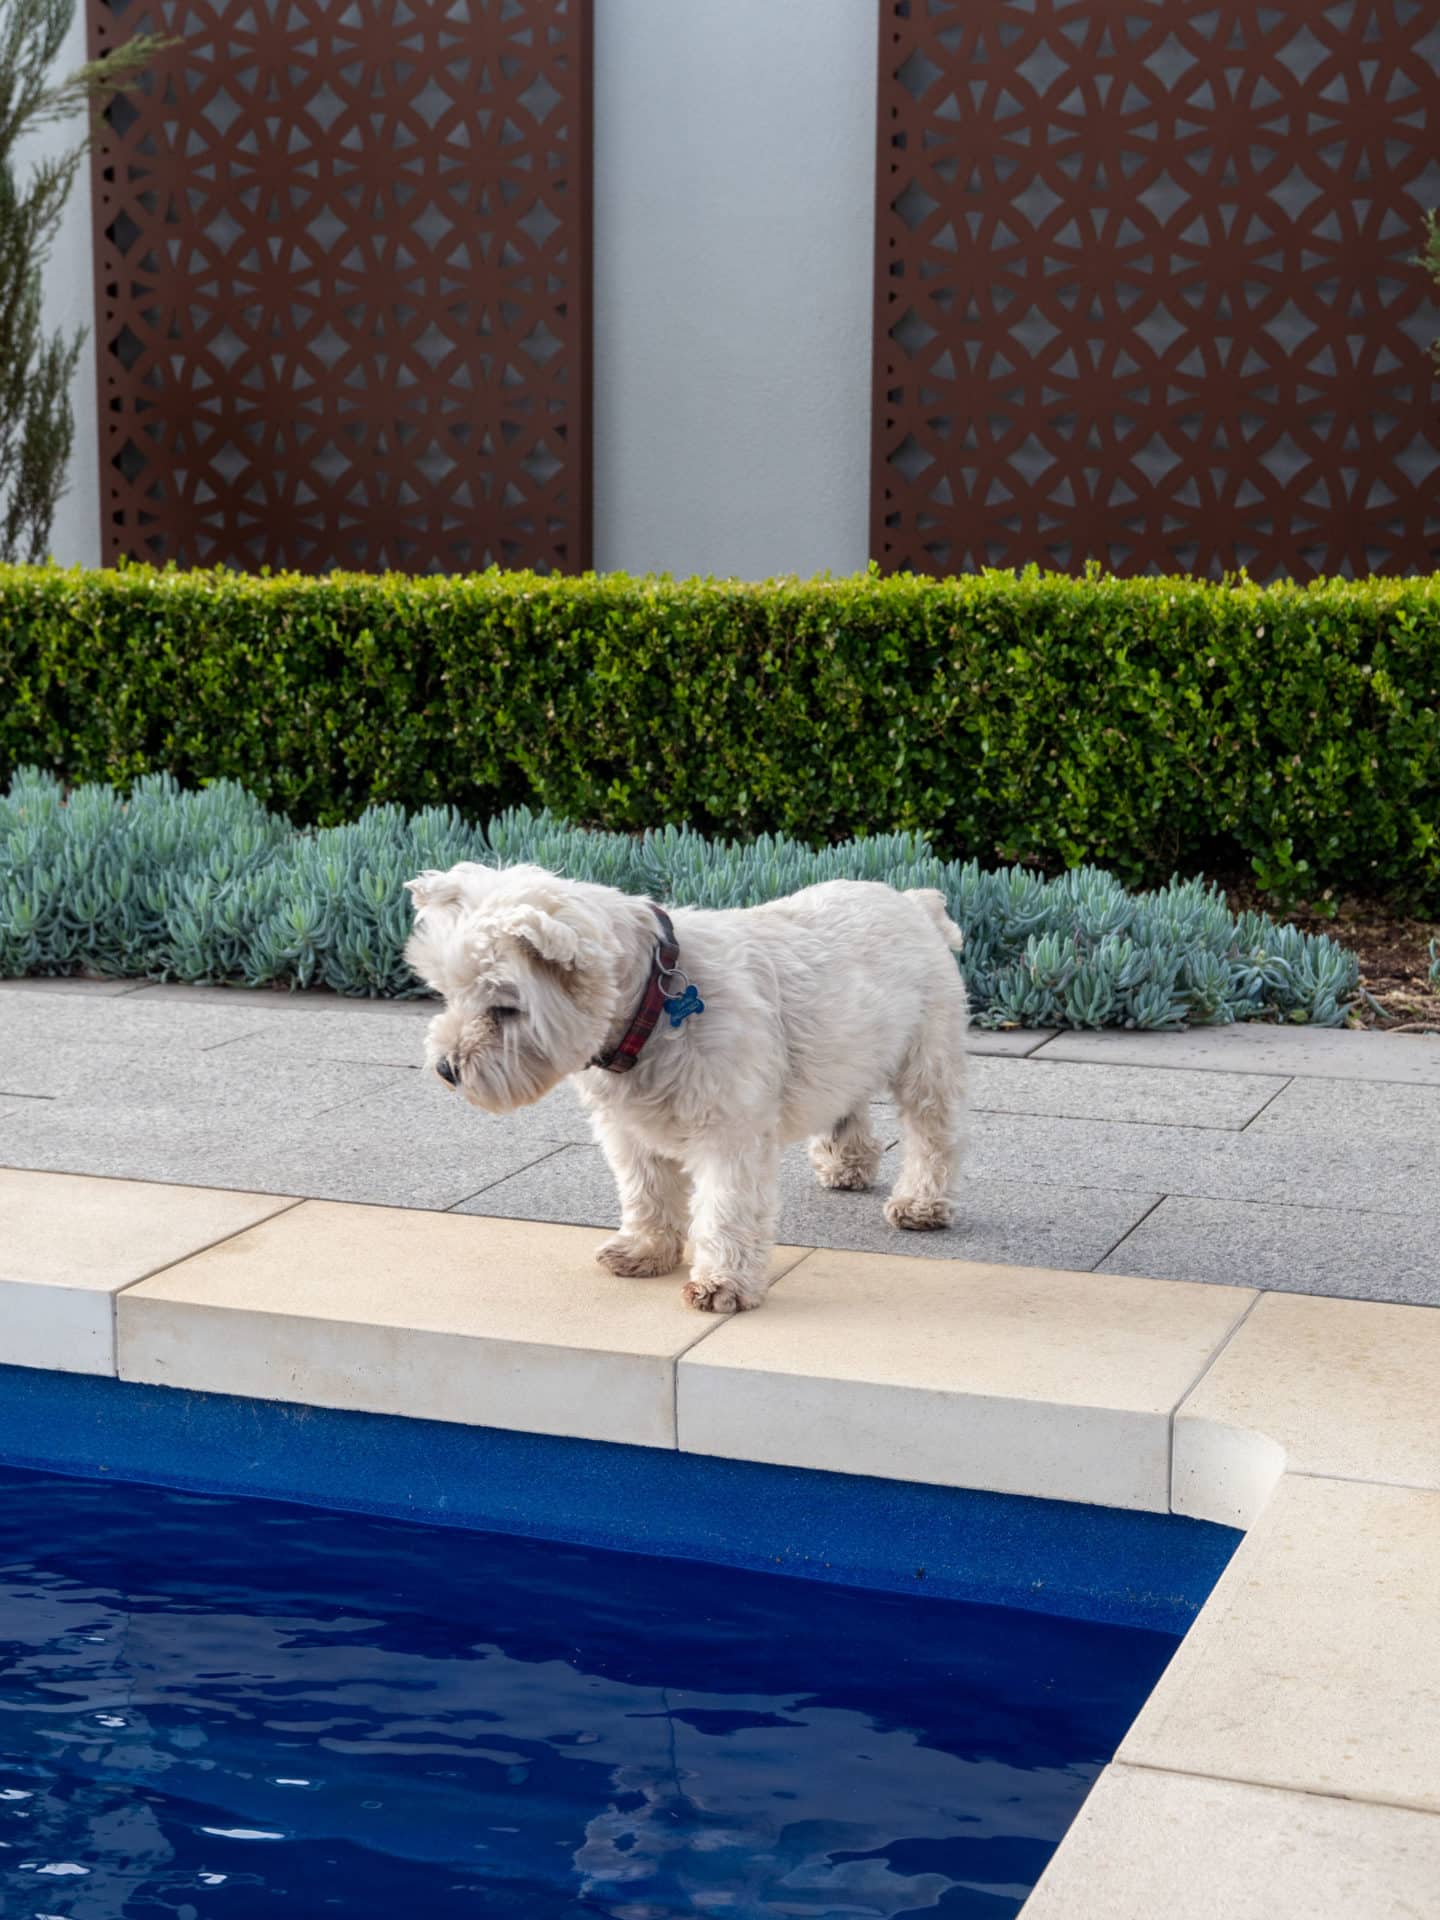 Backyard Inspiration - Building a home for your pampered pet | Australian Outdoor Living